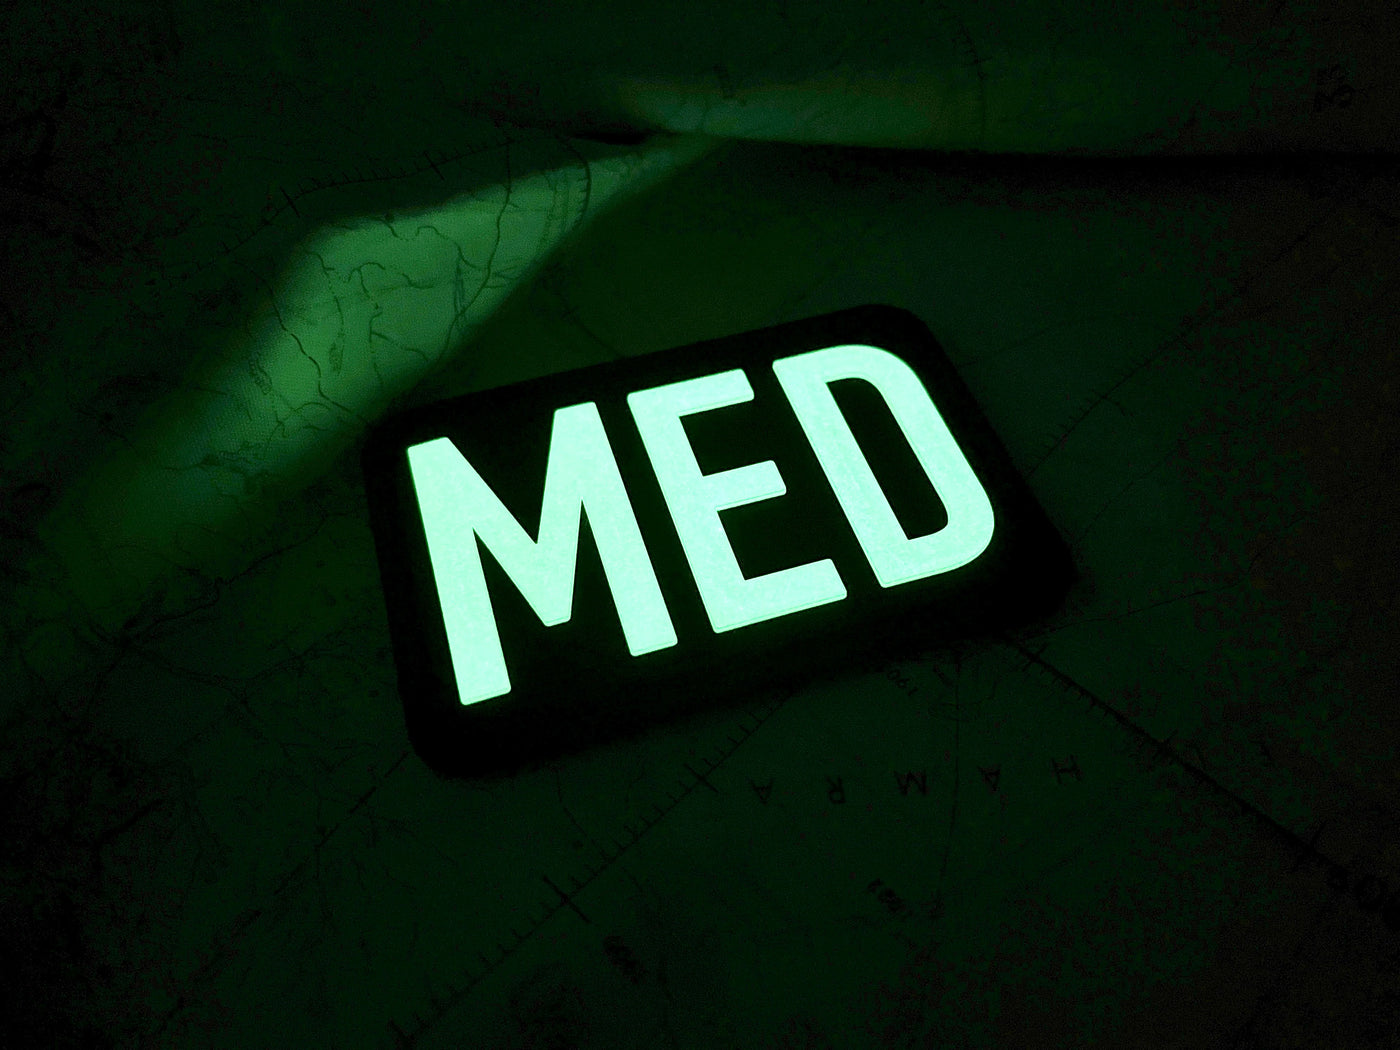 Countycomm - "MED" 2"X3" PVC Glow Patch